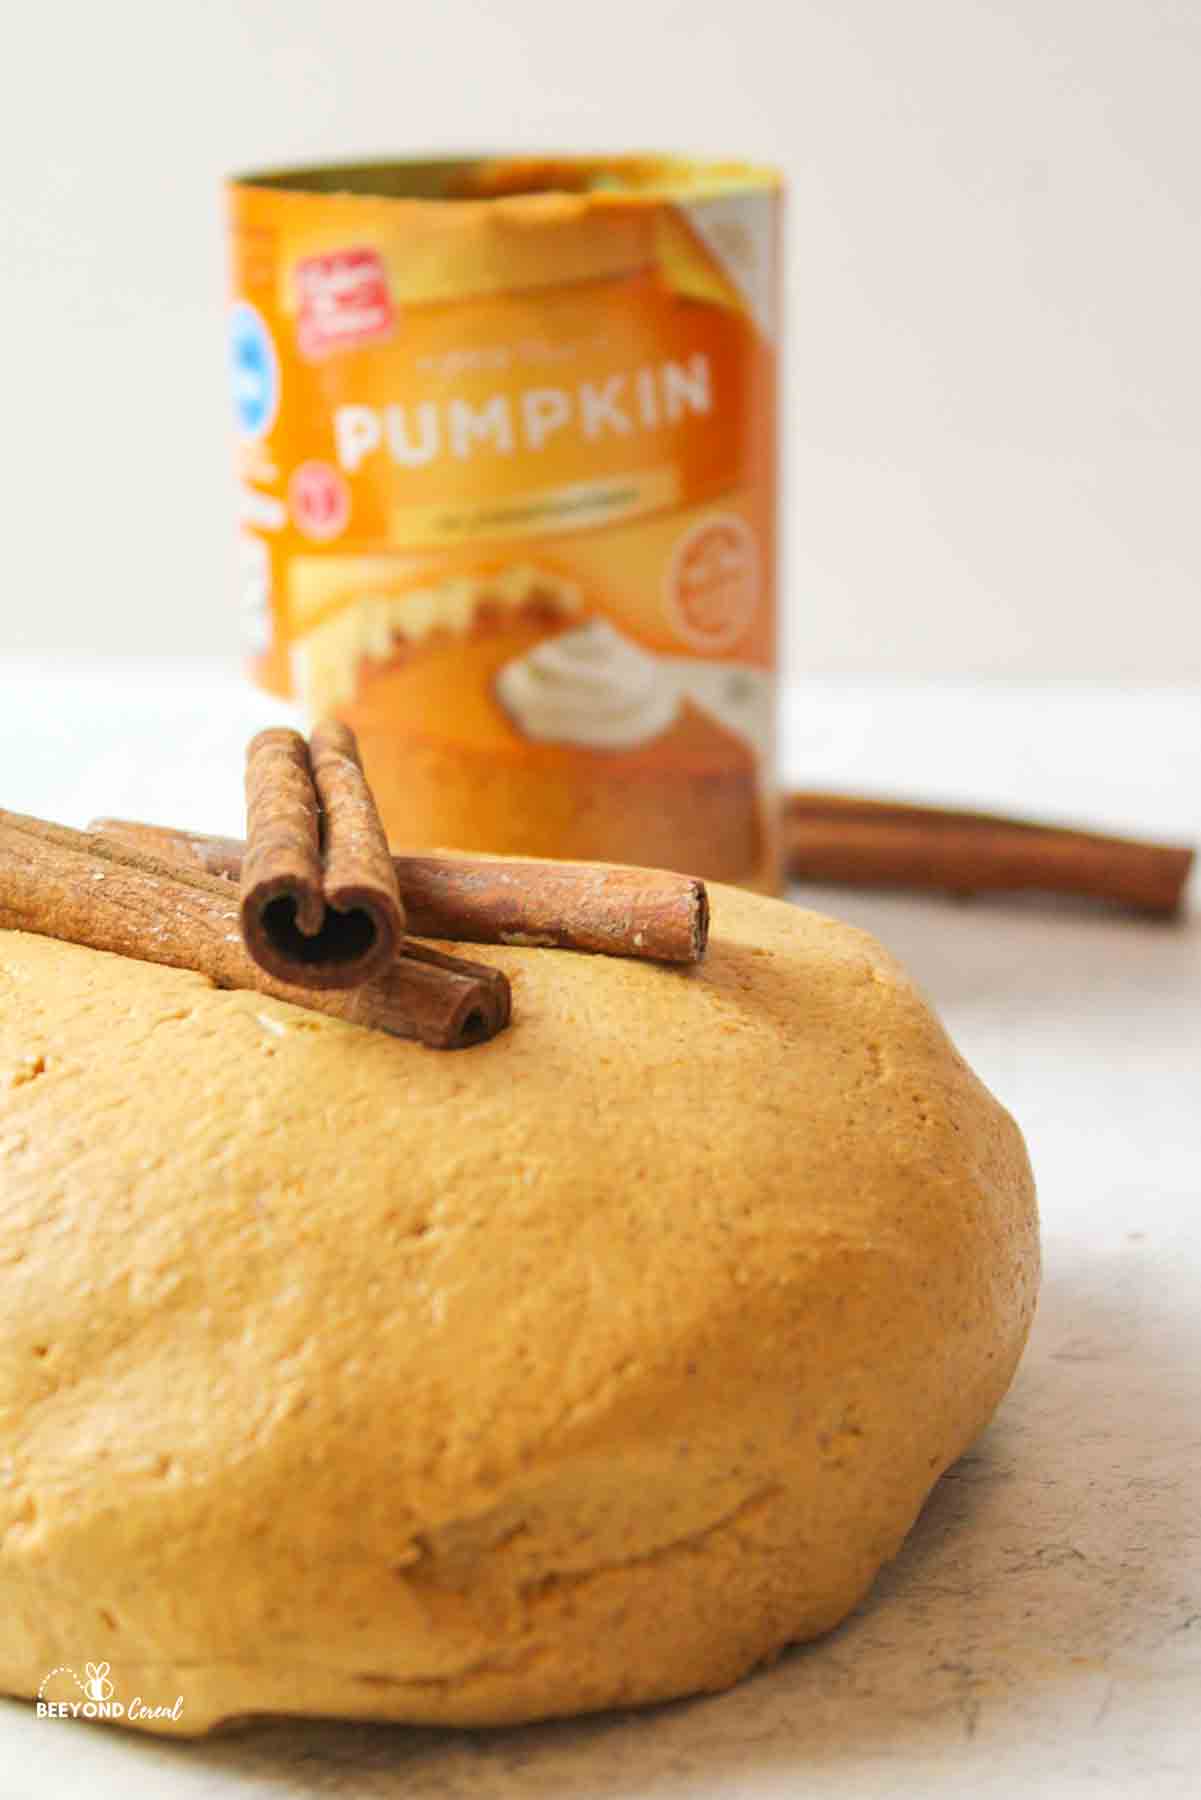 a large ball of pumpkin playdough with cinnamon sticks on top and a can of pumpkin puree in the background.